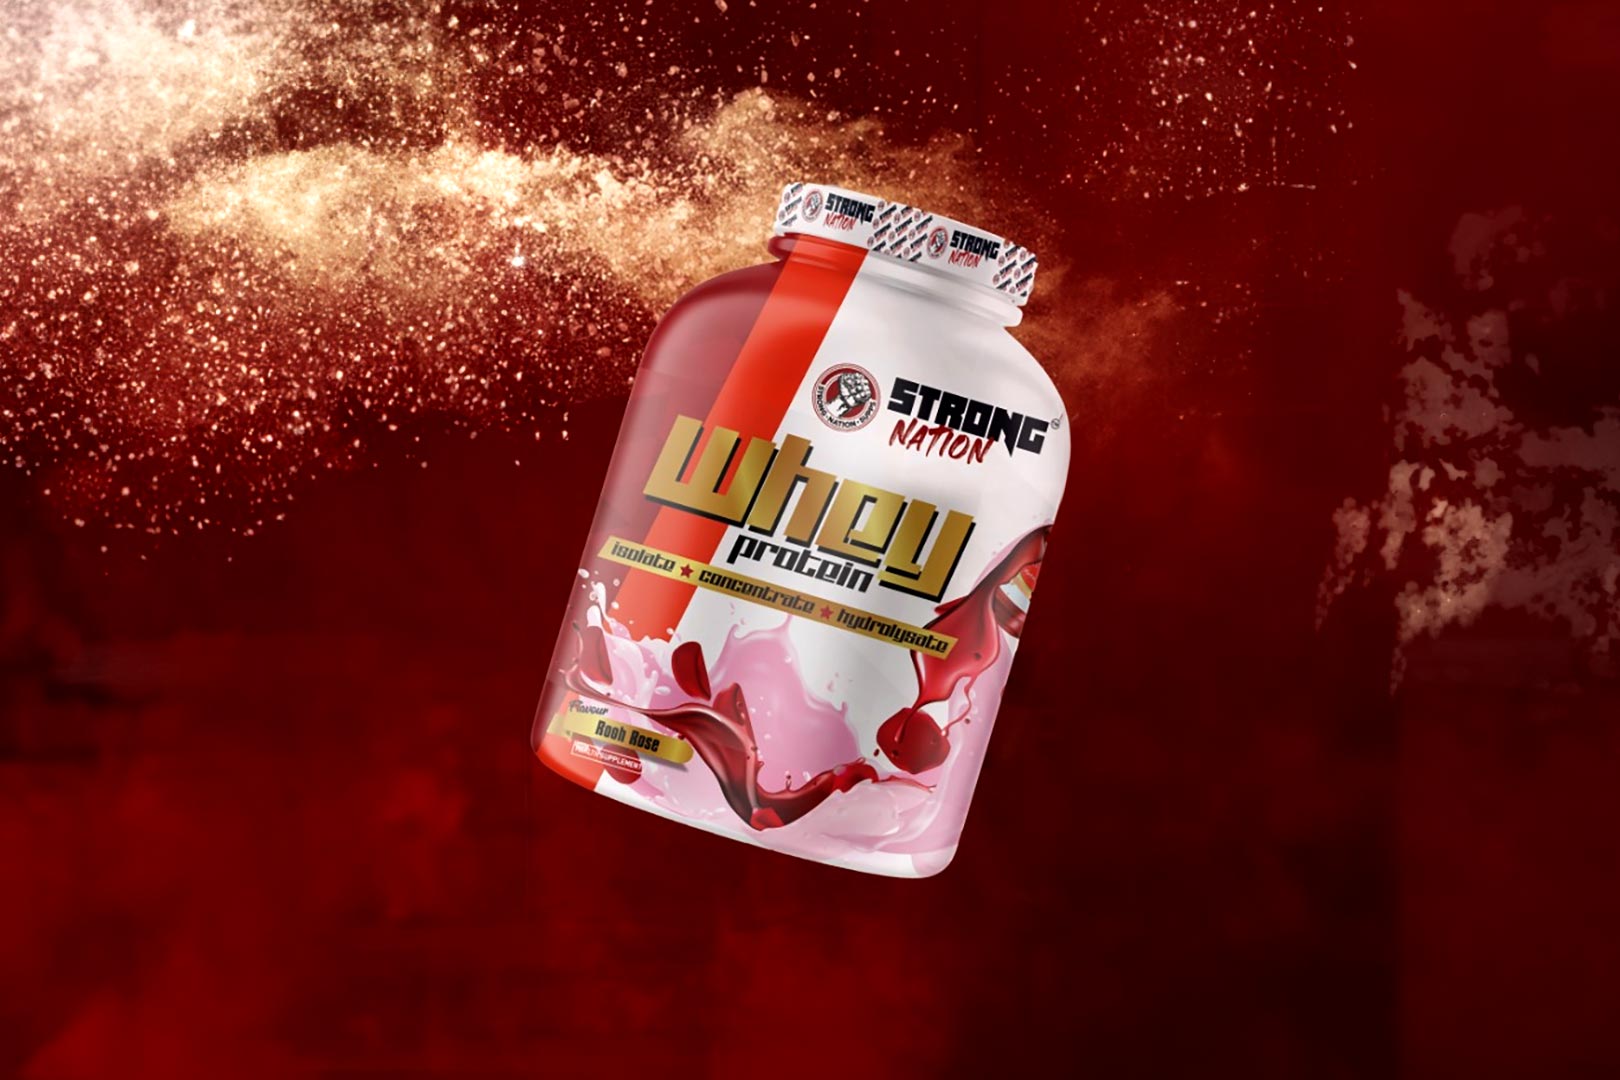 Strong Nation New And Improved Whey Protein